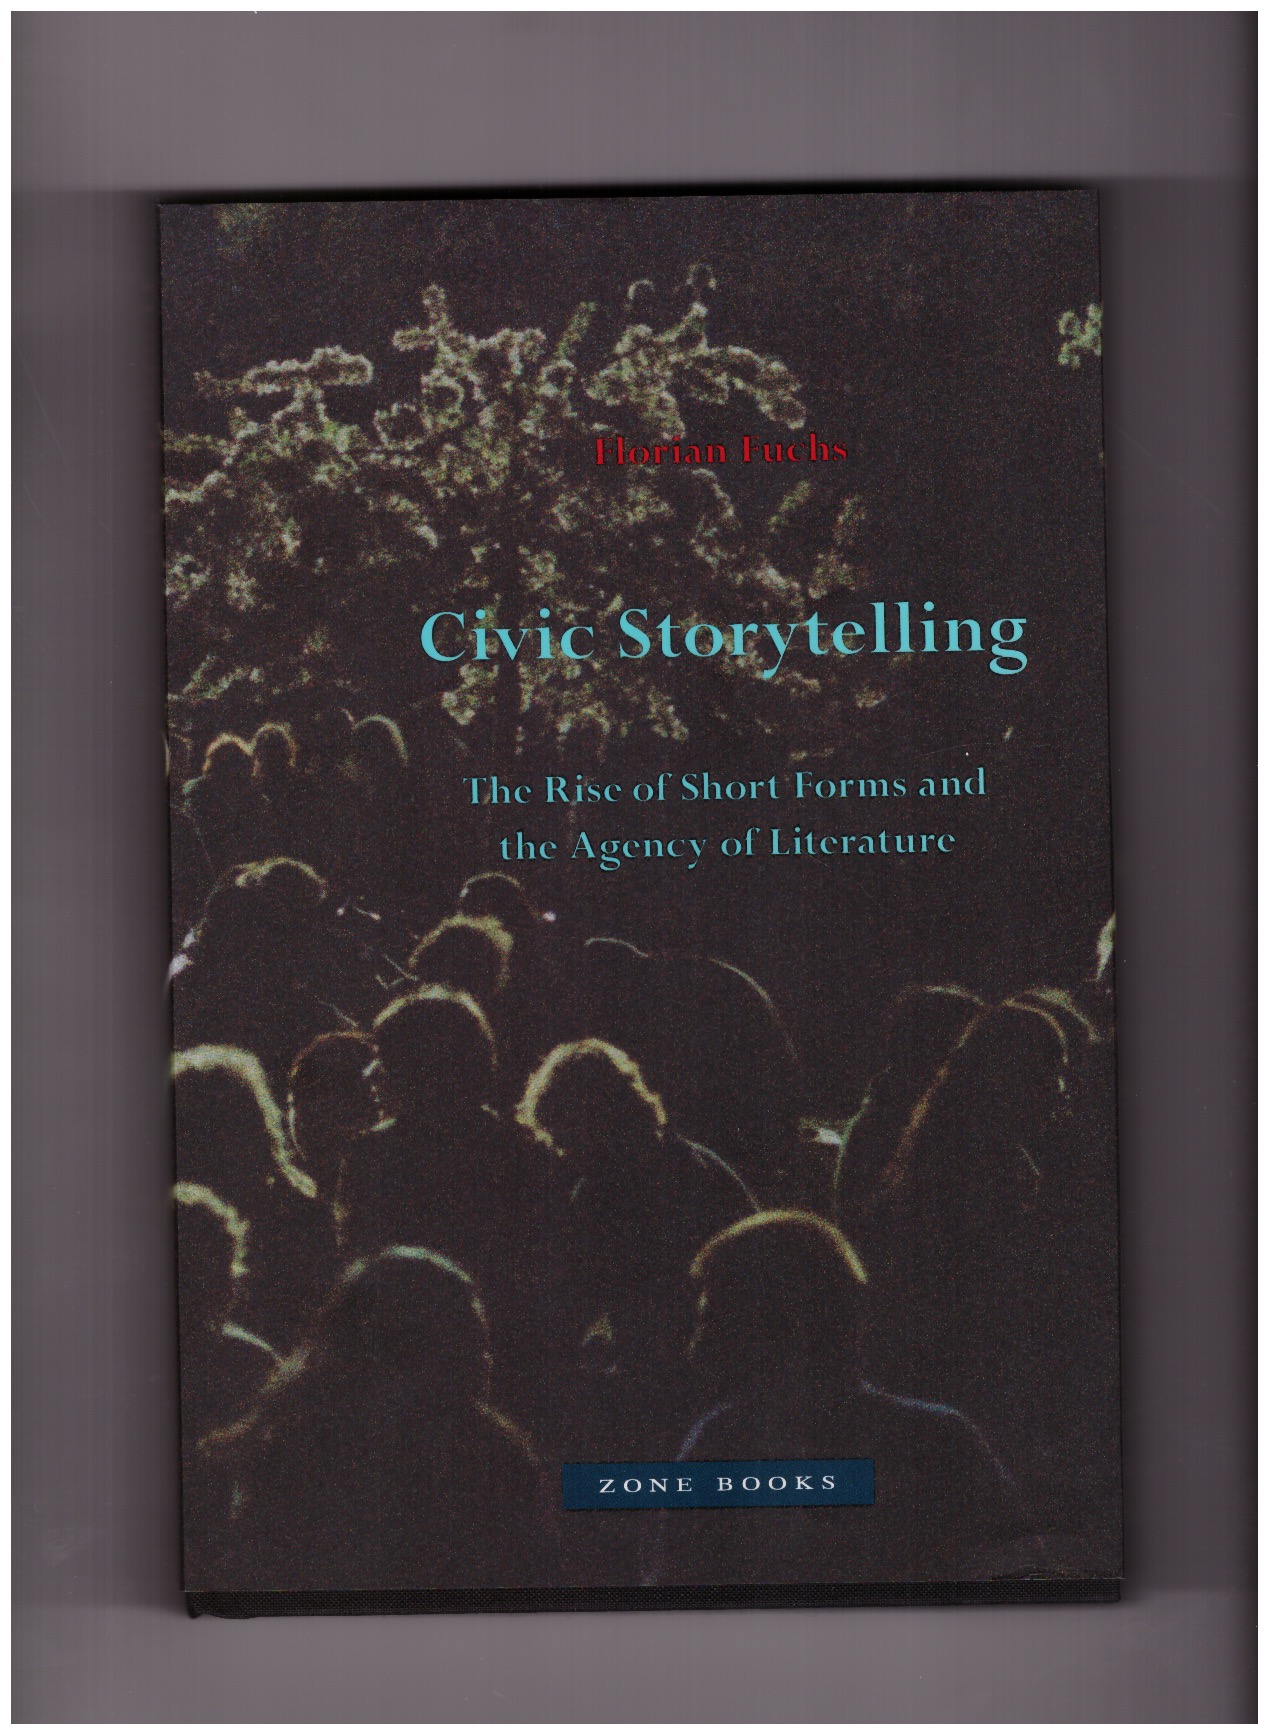 FUCHS, Florian - Civic Storytelling. The Rise of Short Forms and the Agency of Literature